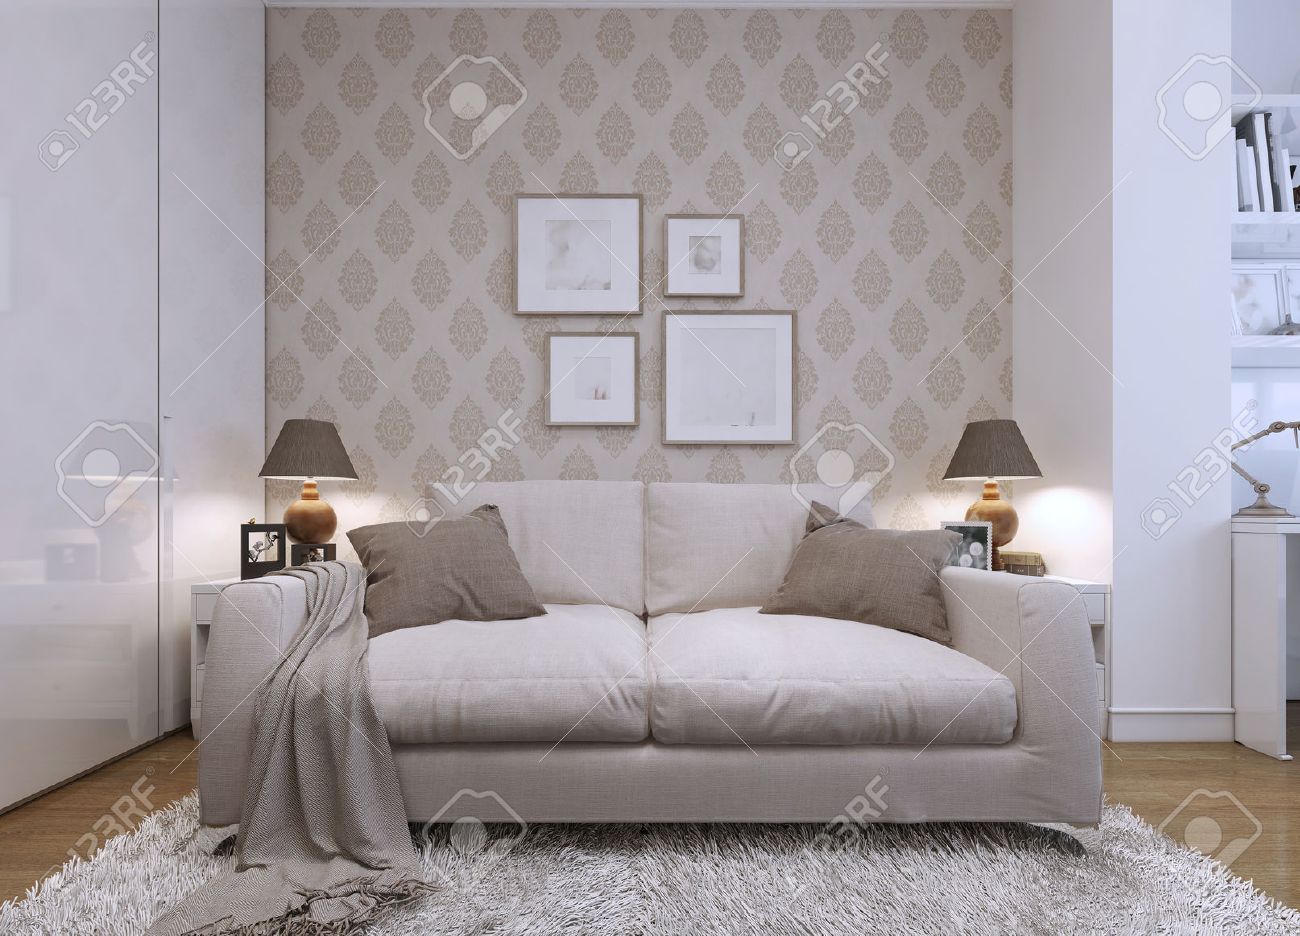 Beige Sofa In The Living Room A Modern Style Wallpaper On